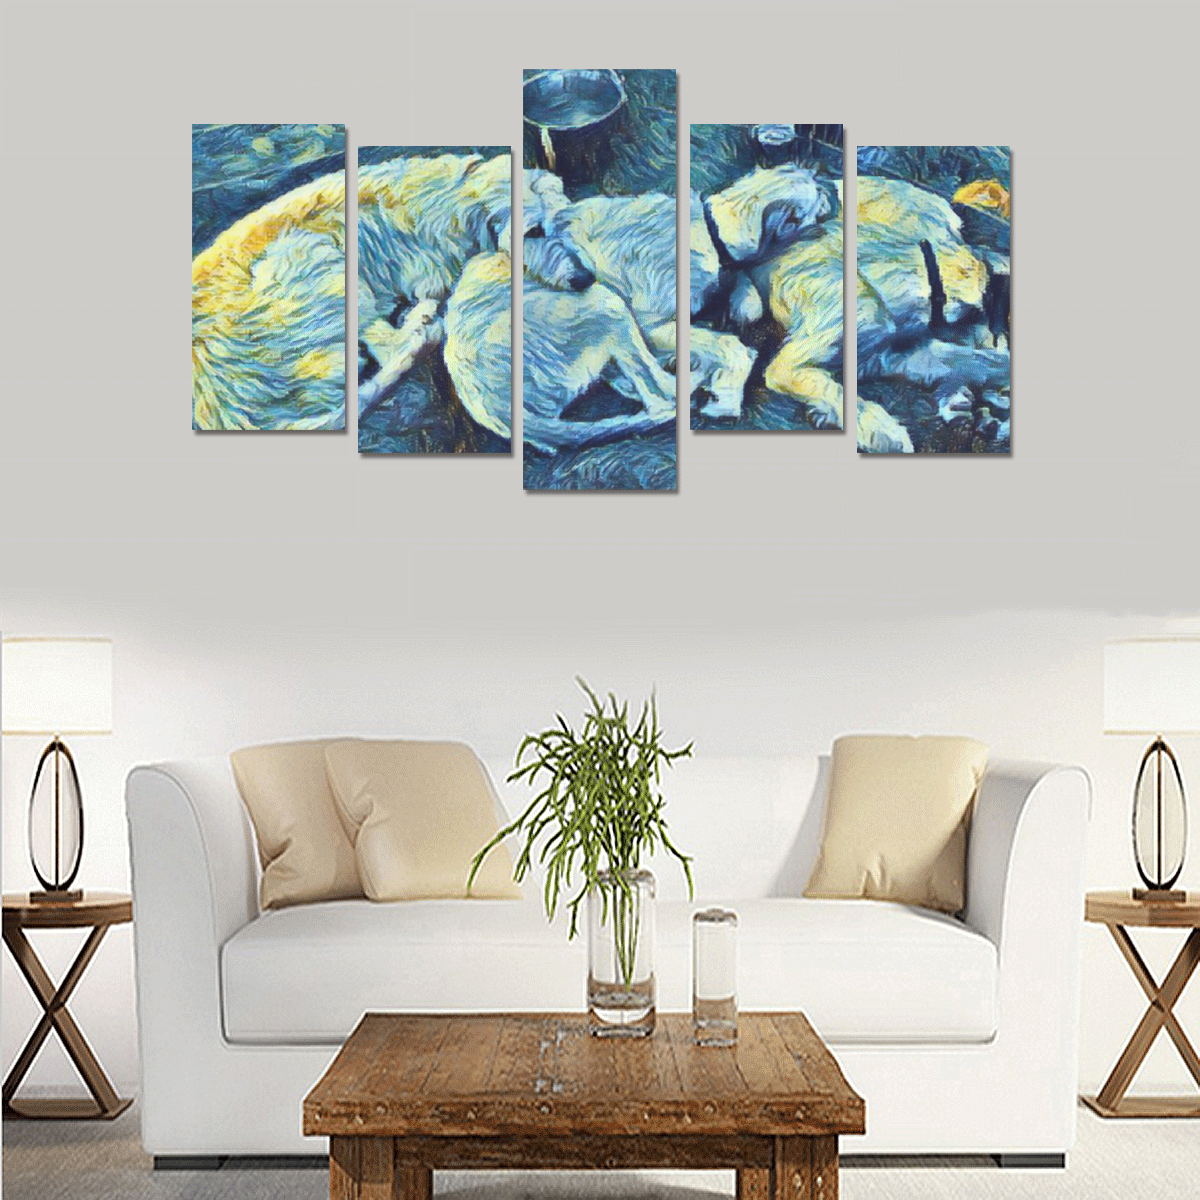 Starry Night Wolfhounds Canvas Print Sets E (No Frame)